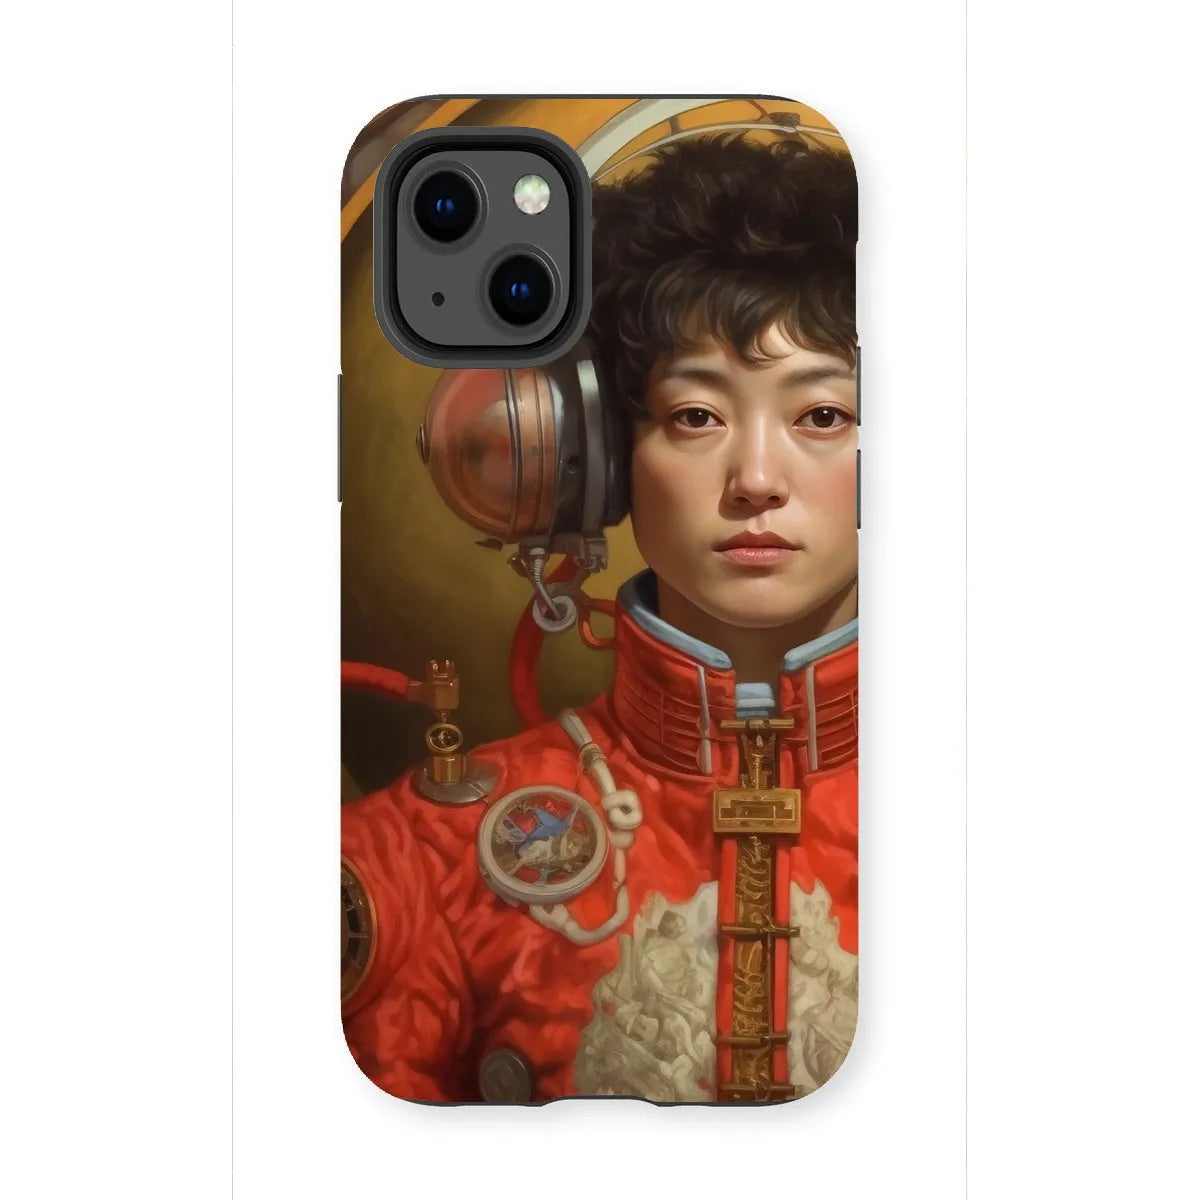 Mùchén - Gay Chinese Astronaut Aesthetic Phone Case - Iphone 13 Mini / Matte - Mobile Phone Cases - Aesthetic Art